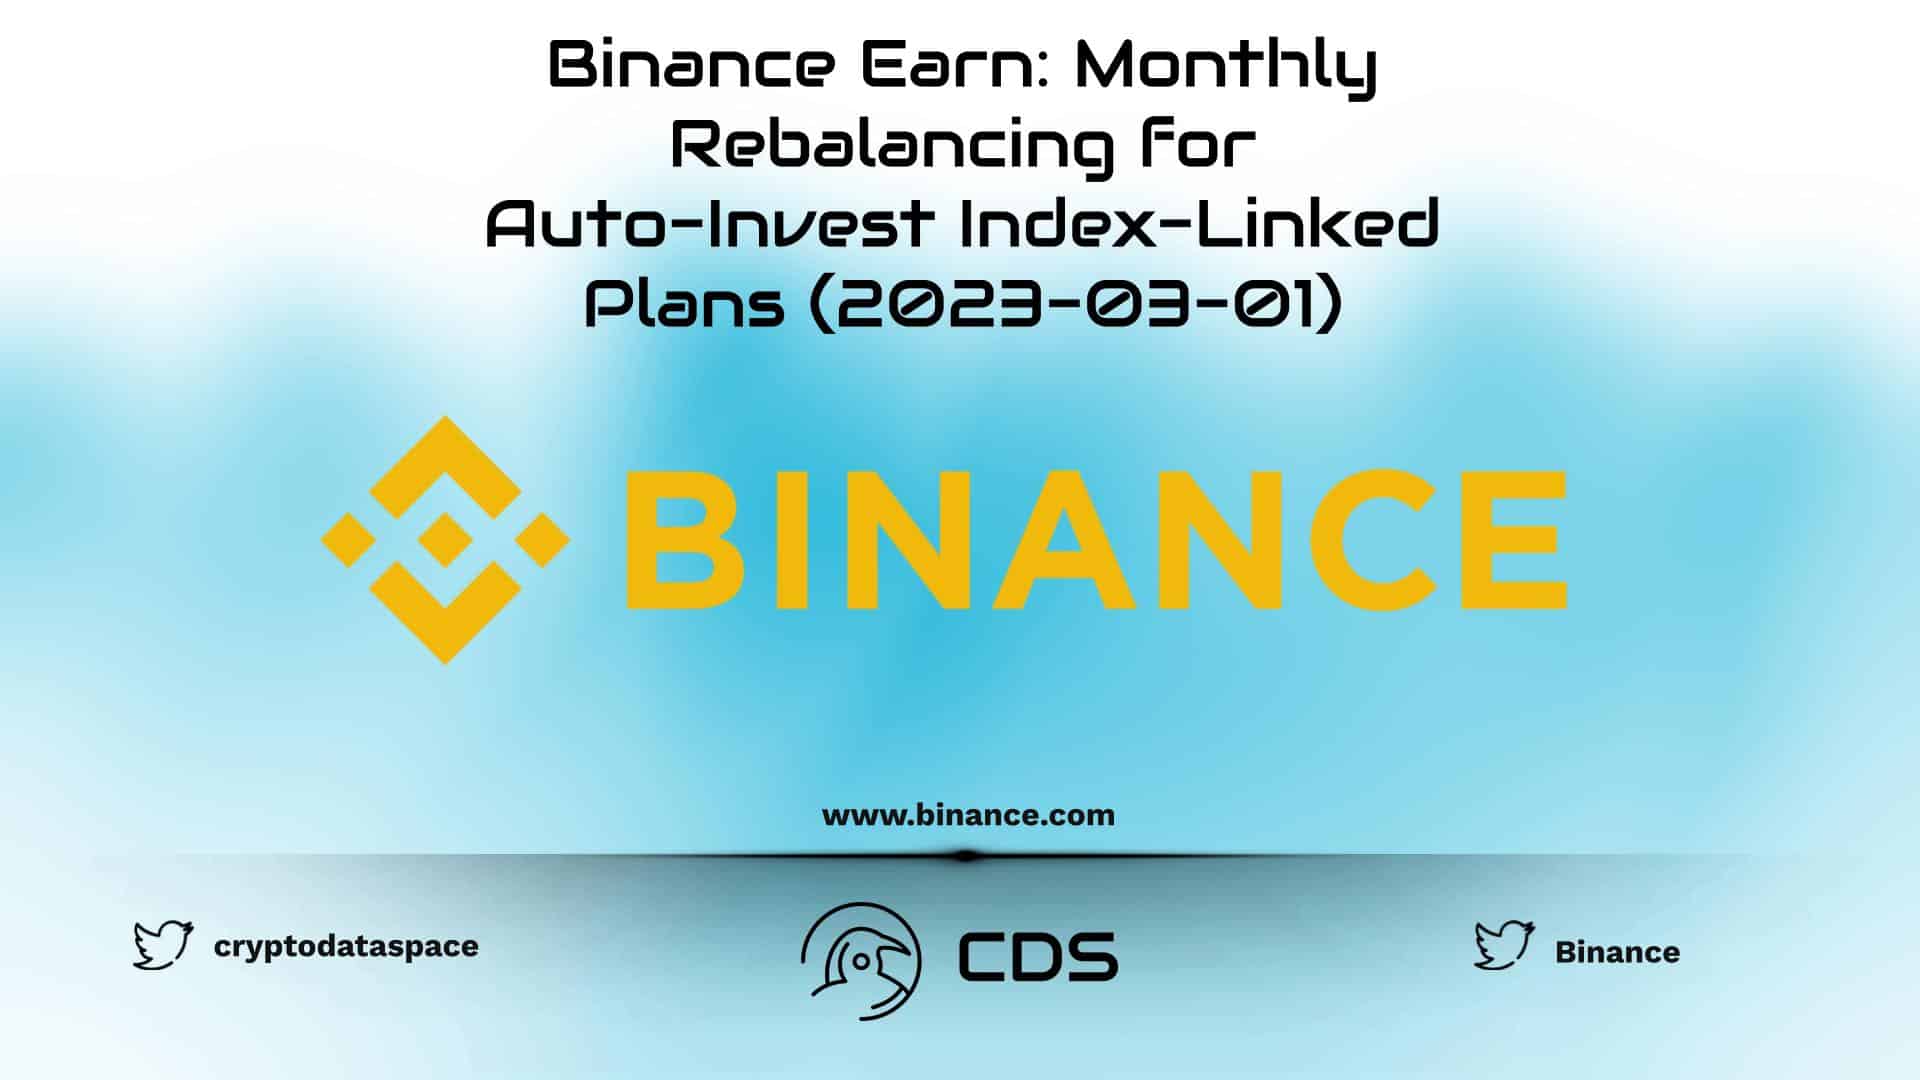 Binance Earn: Monthly Rebalancing for Auto-Invest Index-Linked Plans (2023-03-01)